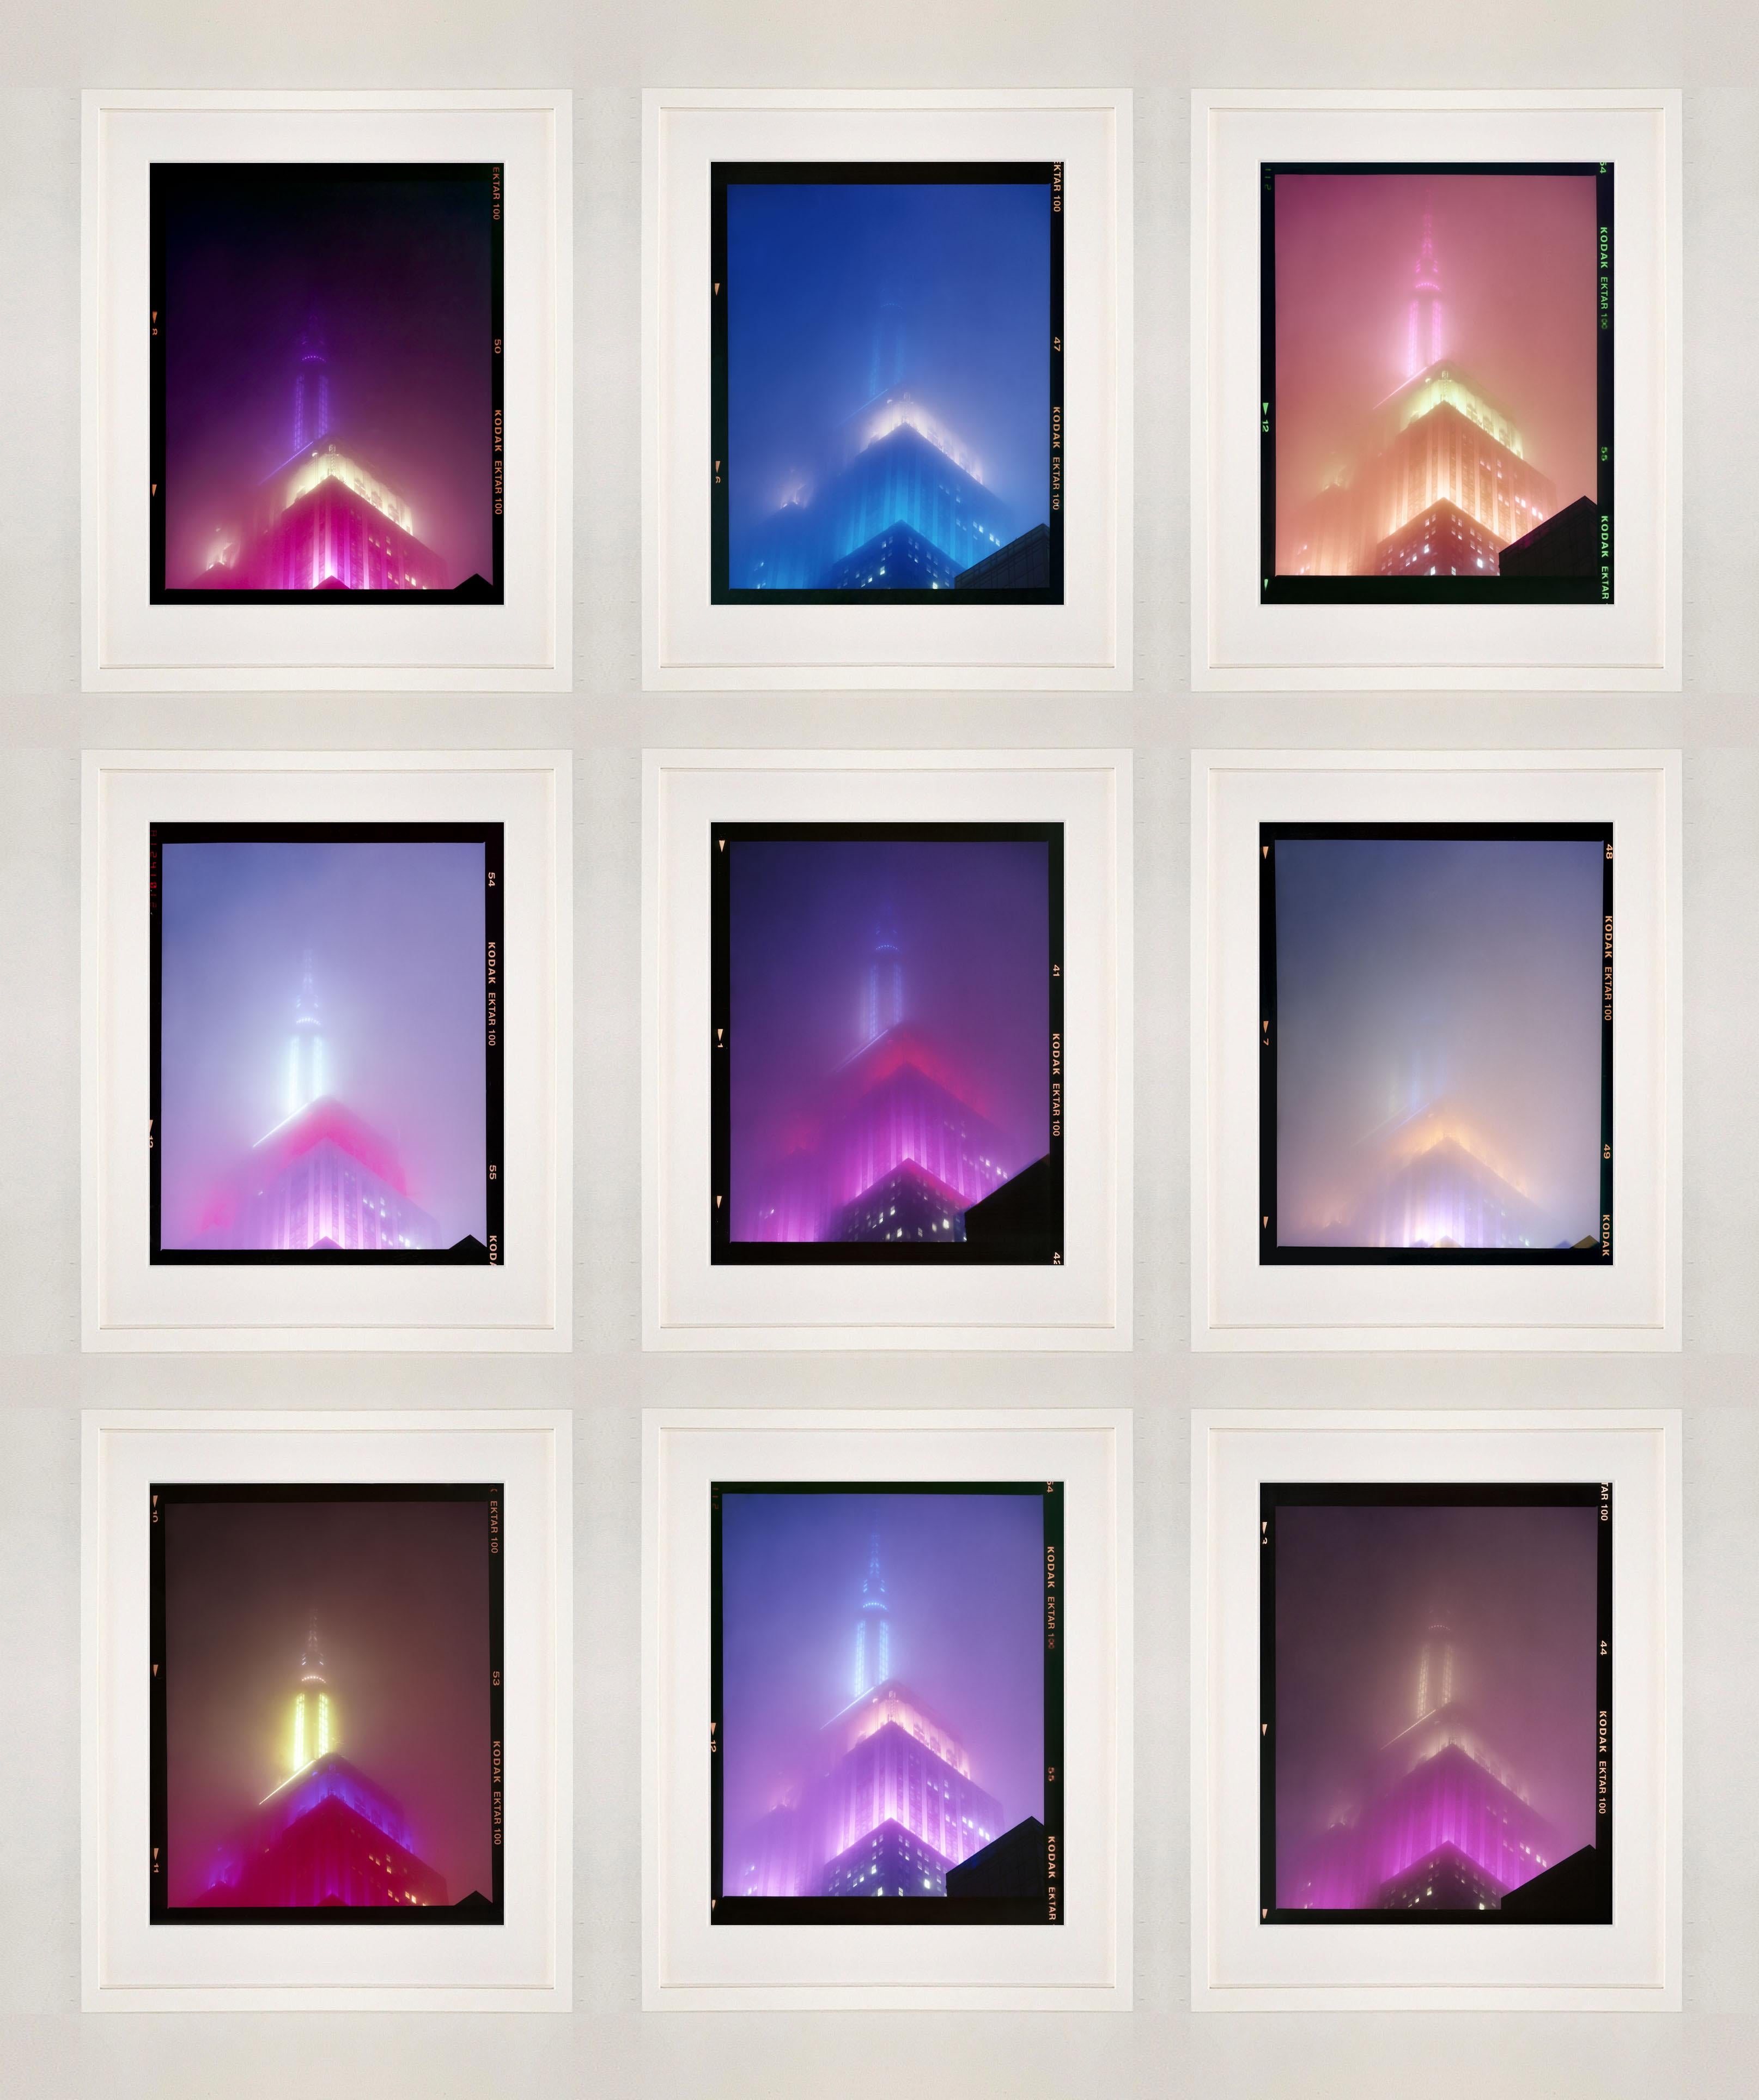 'NOMAD IV (Film Rebate)', New York. Richard Heeps has photographed the iconic Empire State building in the mist. The NOMAD sequence of photographs capture the art deco architecture illuminated by changing colours, and is part of Richard's street